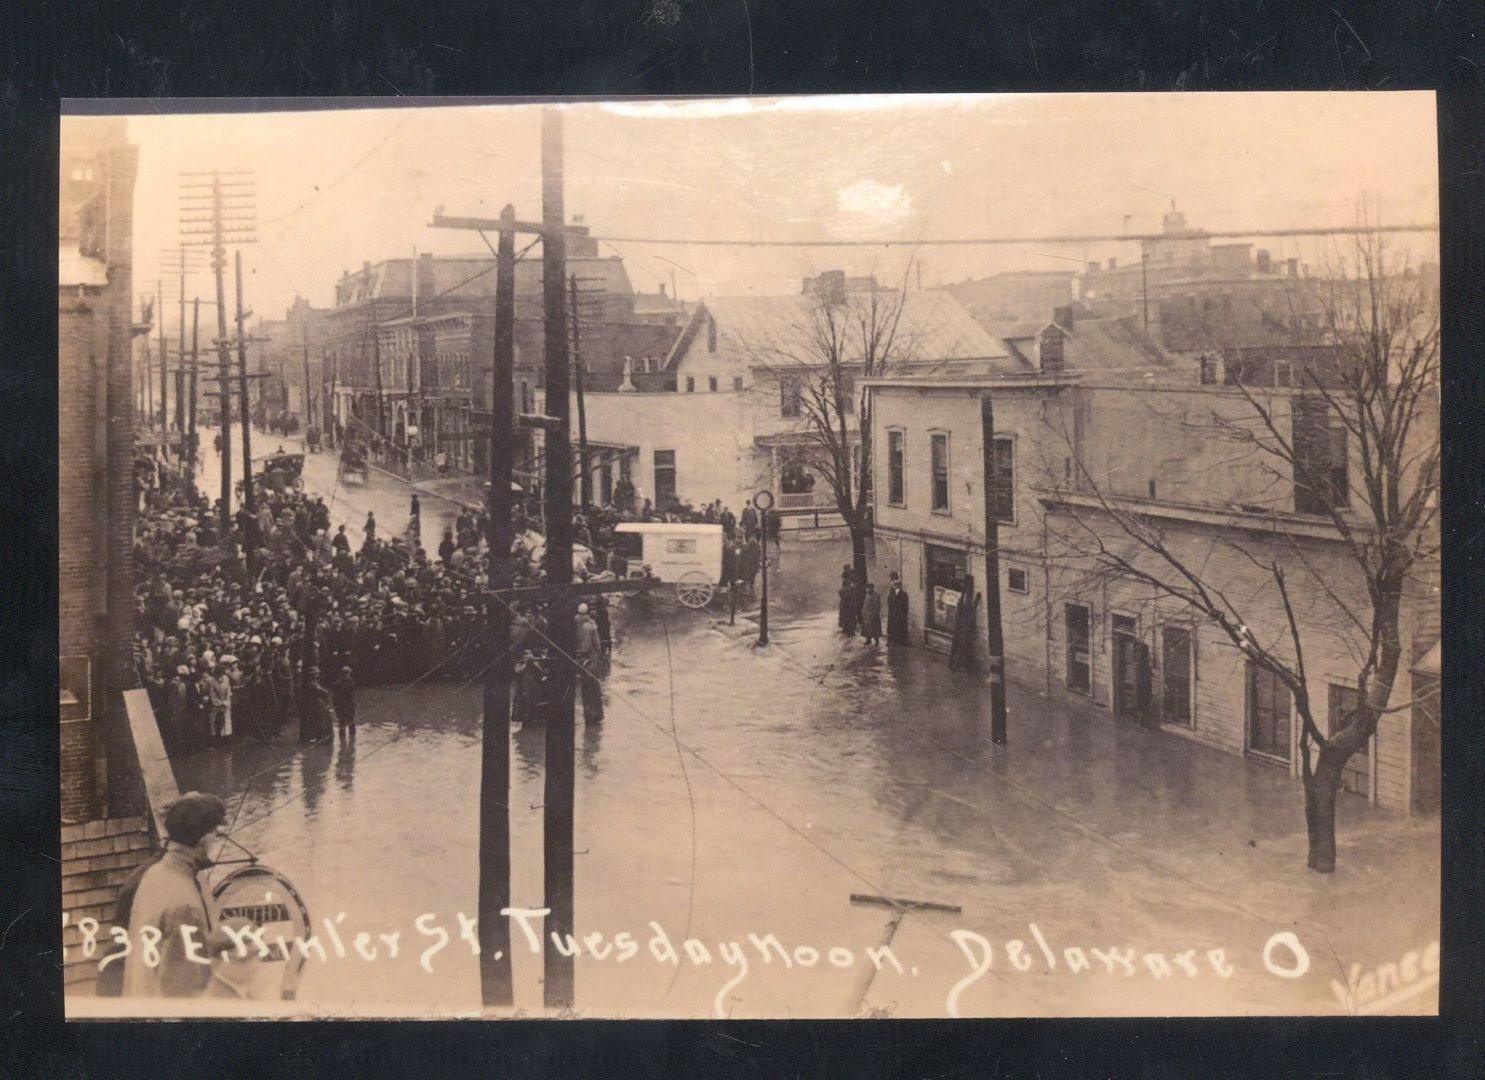 REAL PHOTO DELAWARE OHIO 1913 FLOOD DISASTER DOWNTOWN WINTER ST POSTCARD COPY